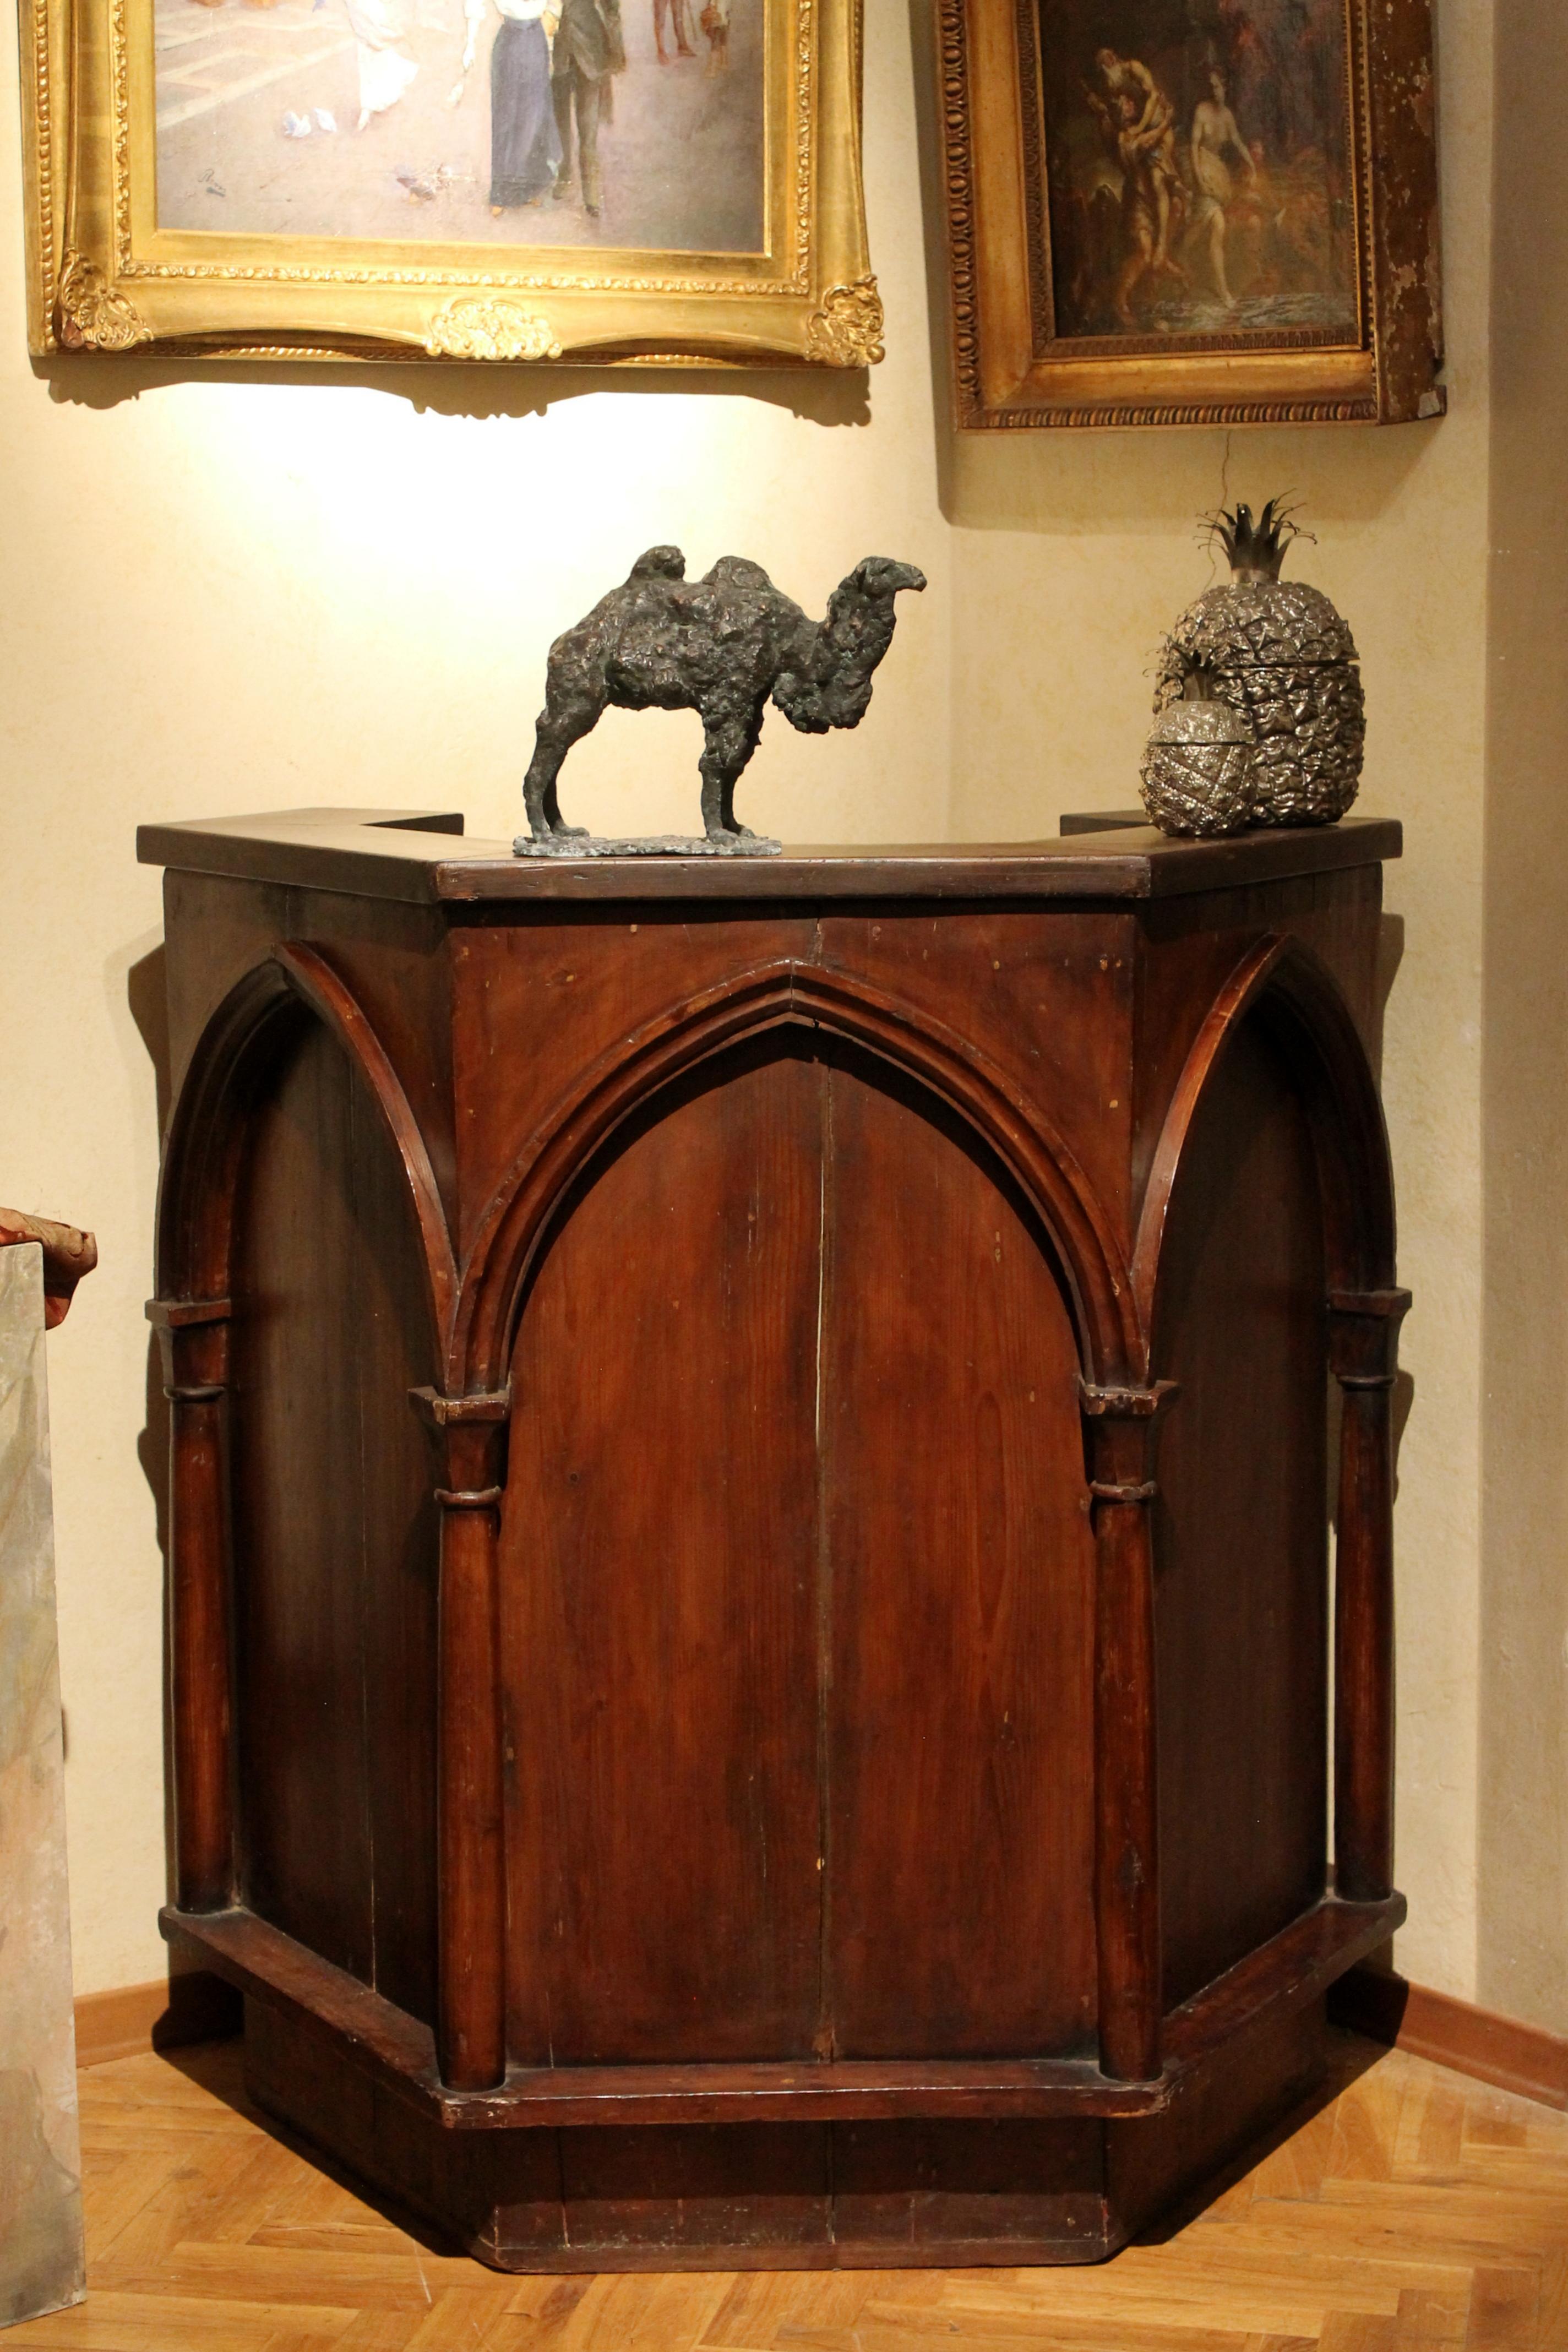 This antique Italian walnut wood pulpit is an outstanding and rare Gothic Revival piece of furniture from late 19th century architecturally shaped with columns and broken arches.
The Neo Gothic pulpit is built in the form of a pentagon made up of